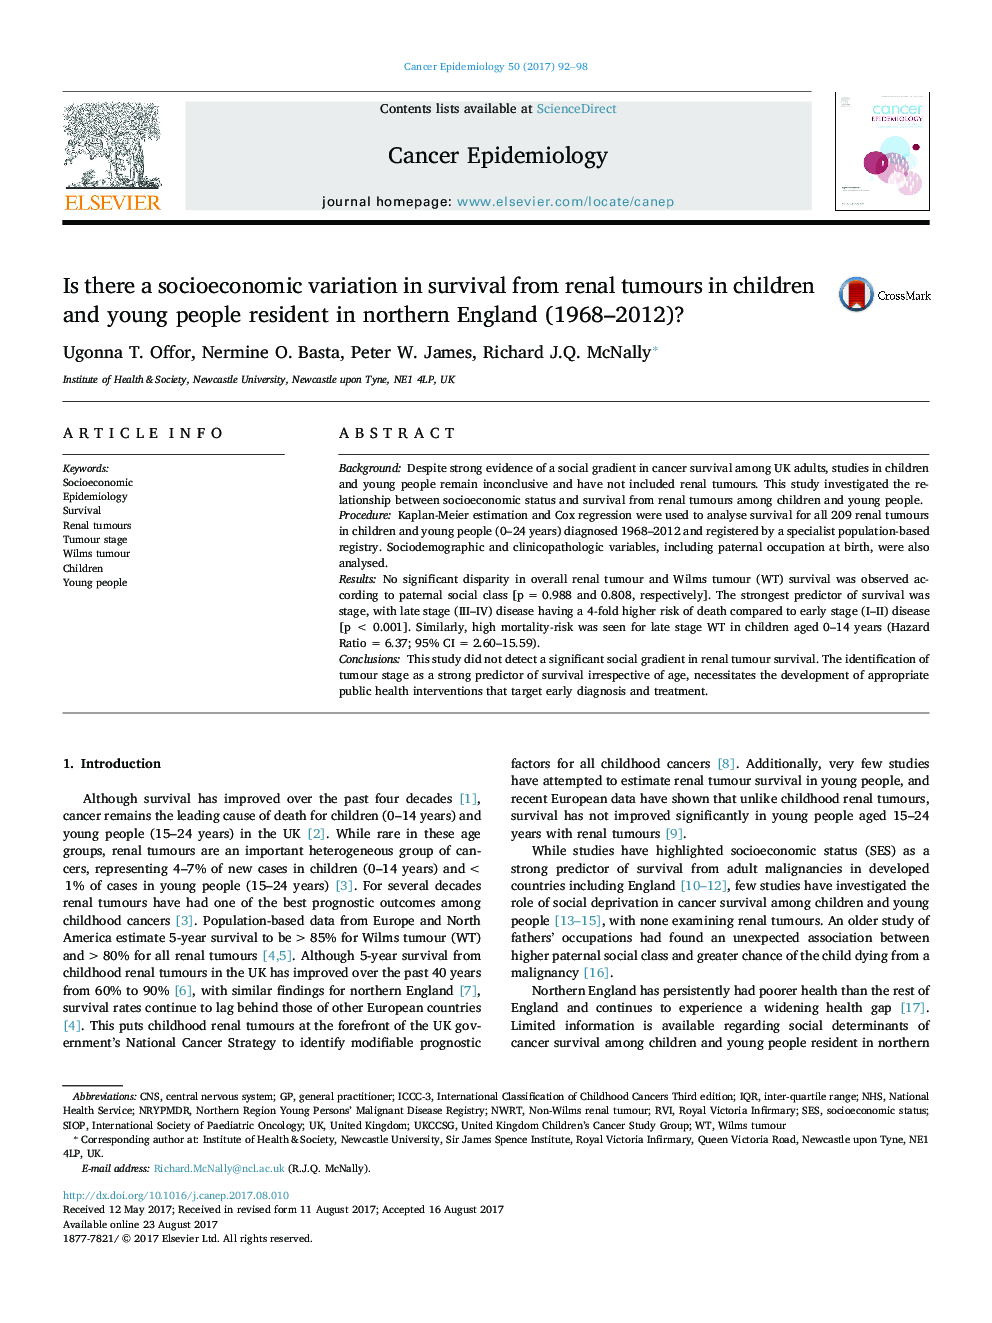 Is there a socioeconomic variation in survival from renal tumours in children and young people resident in northern England (1968-2012)?